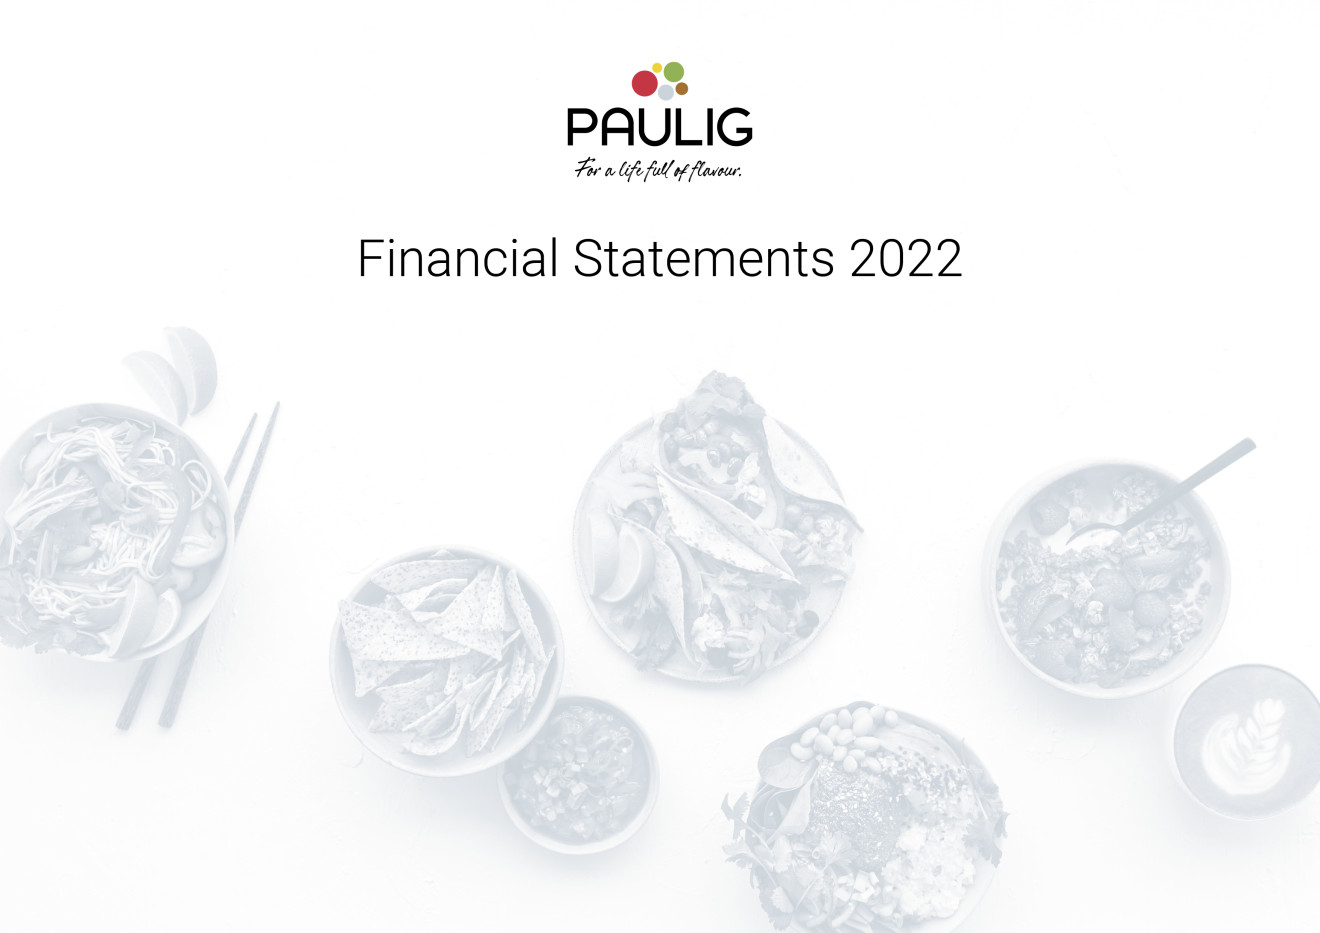 Cover phot financial statement 2022